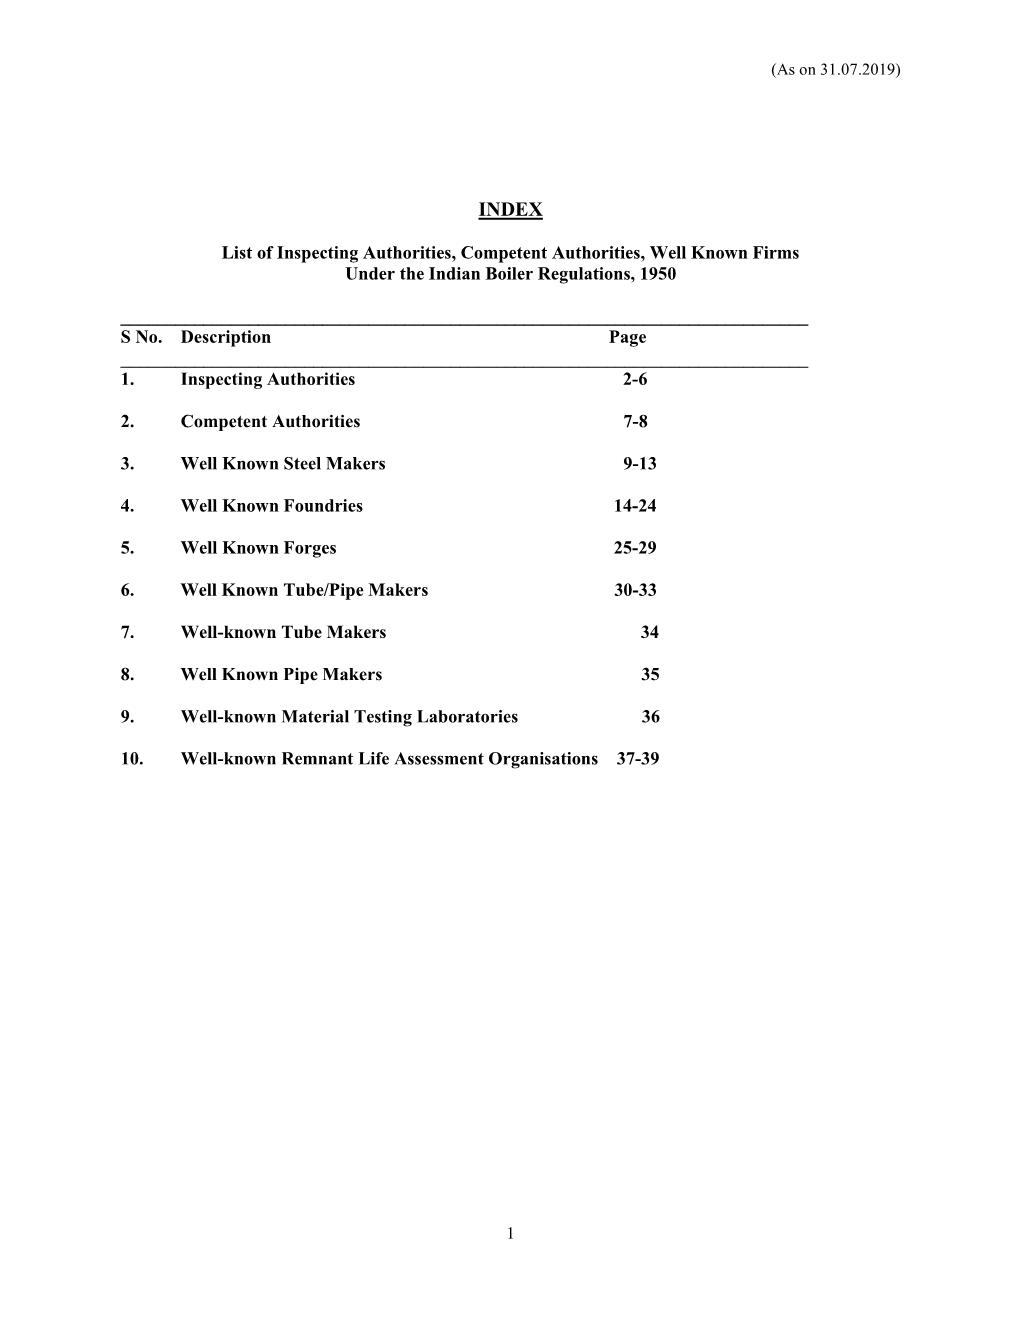 List of Inspecting Authorities, Competent Authorities, Well Known Firms Under the Indian Boiler Regulations, 1950